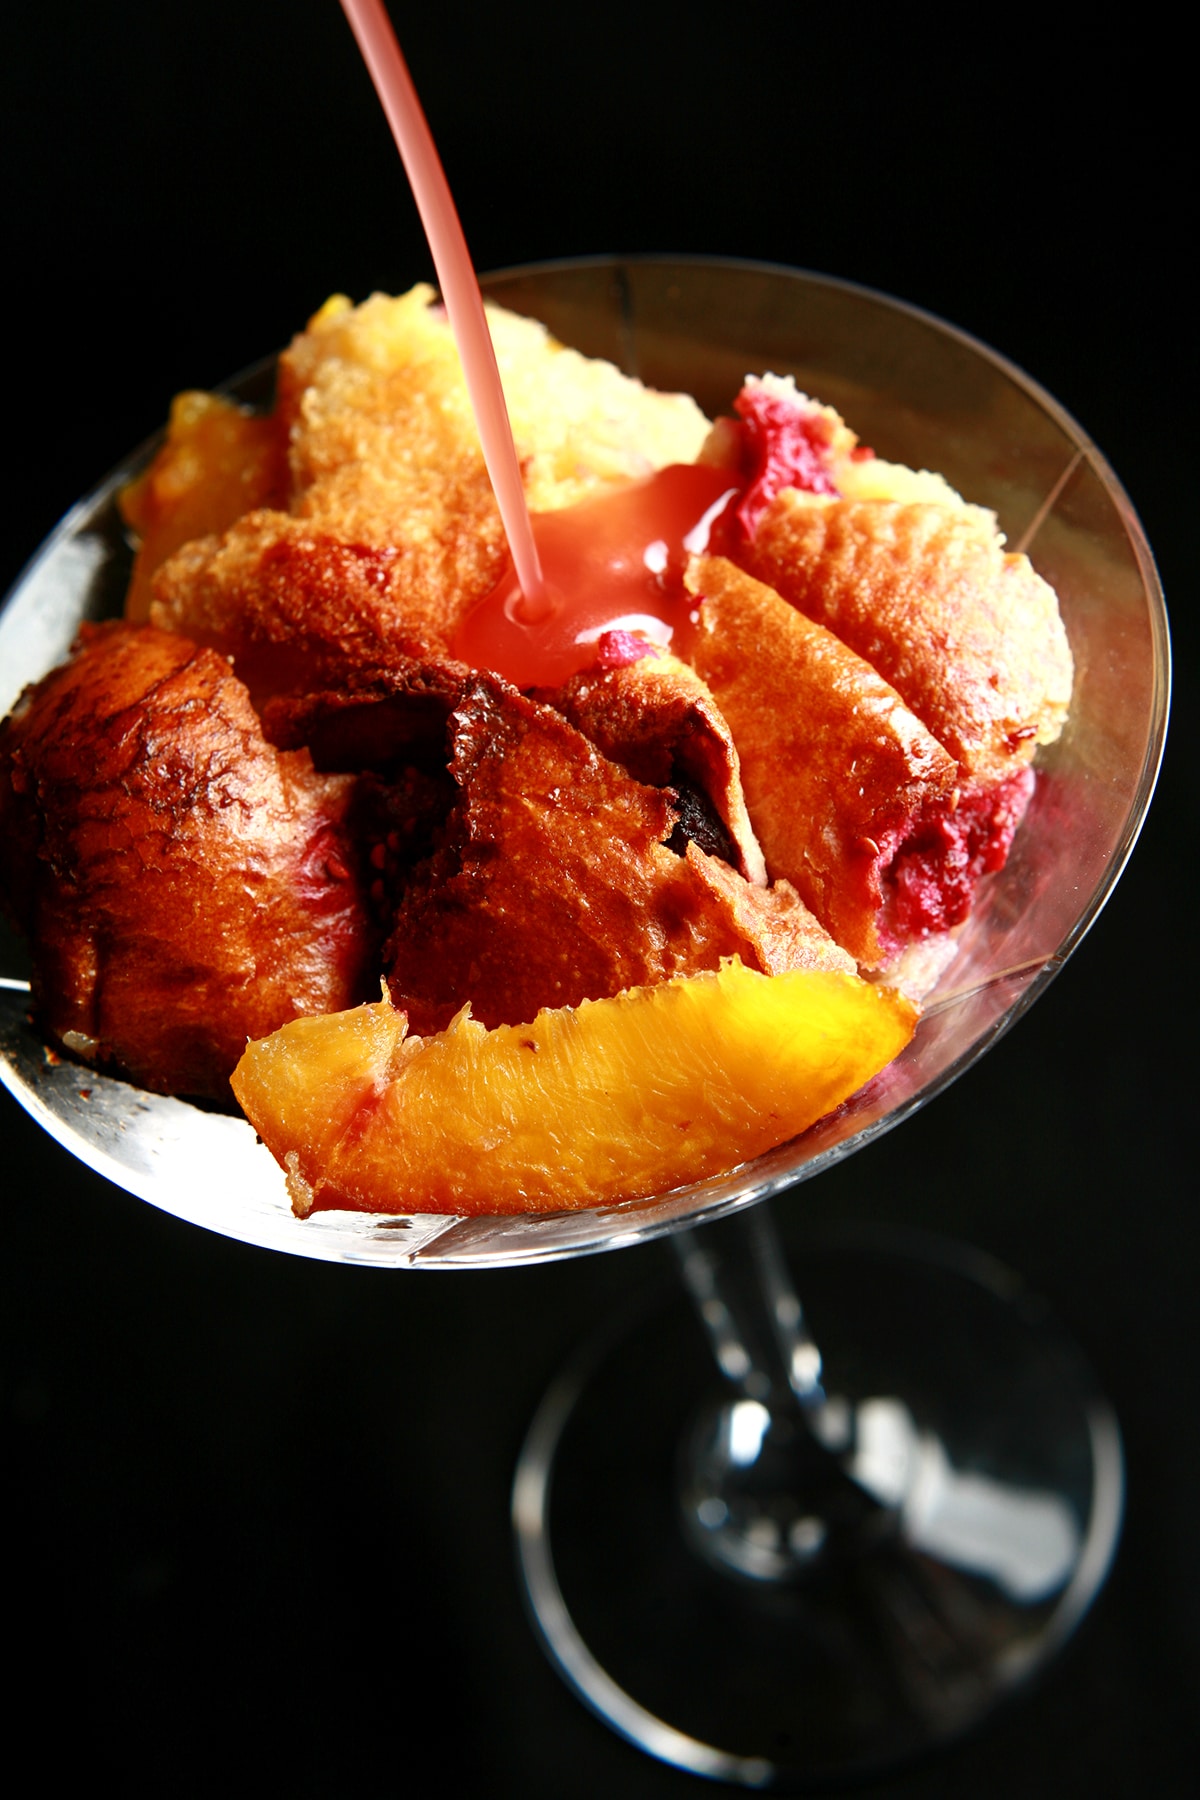 A serving of bread pudding in a martini glass. Peaches, raspberries, and a pink chambord sauce are visible.